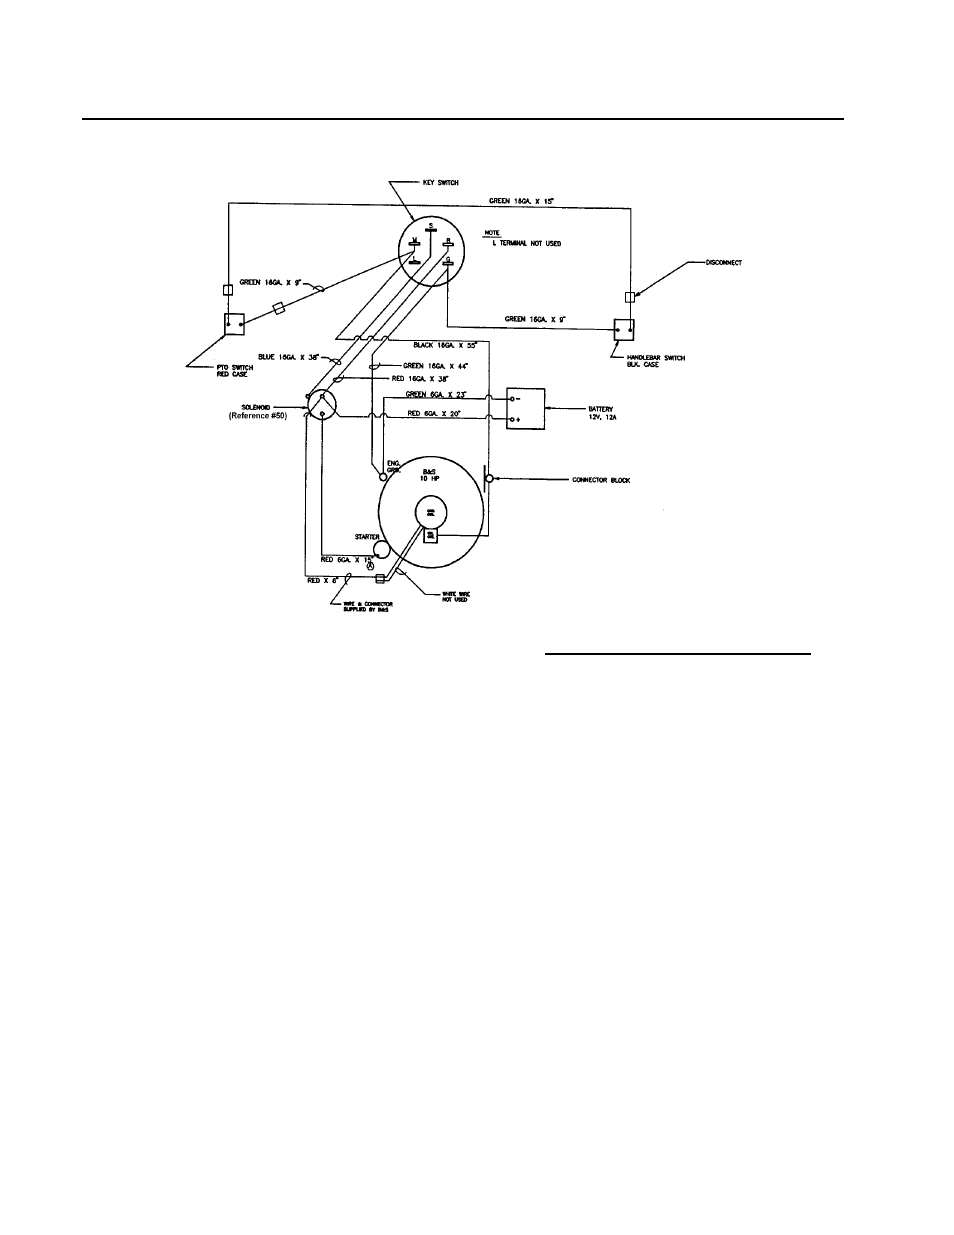 Wiring diagrams (cont.) | DR Power Walk-behind 8 - 15 HP (1998 - 2001